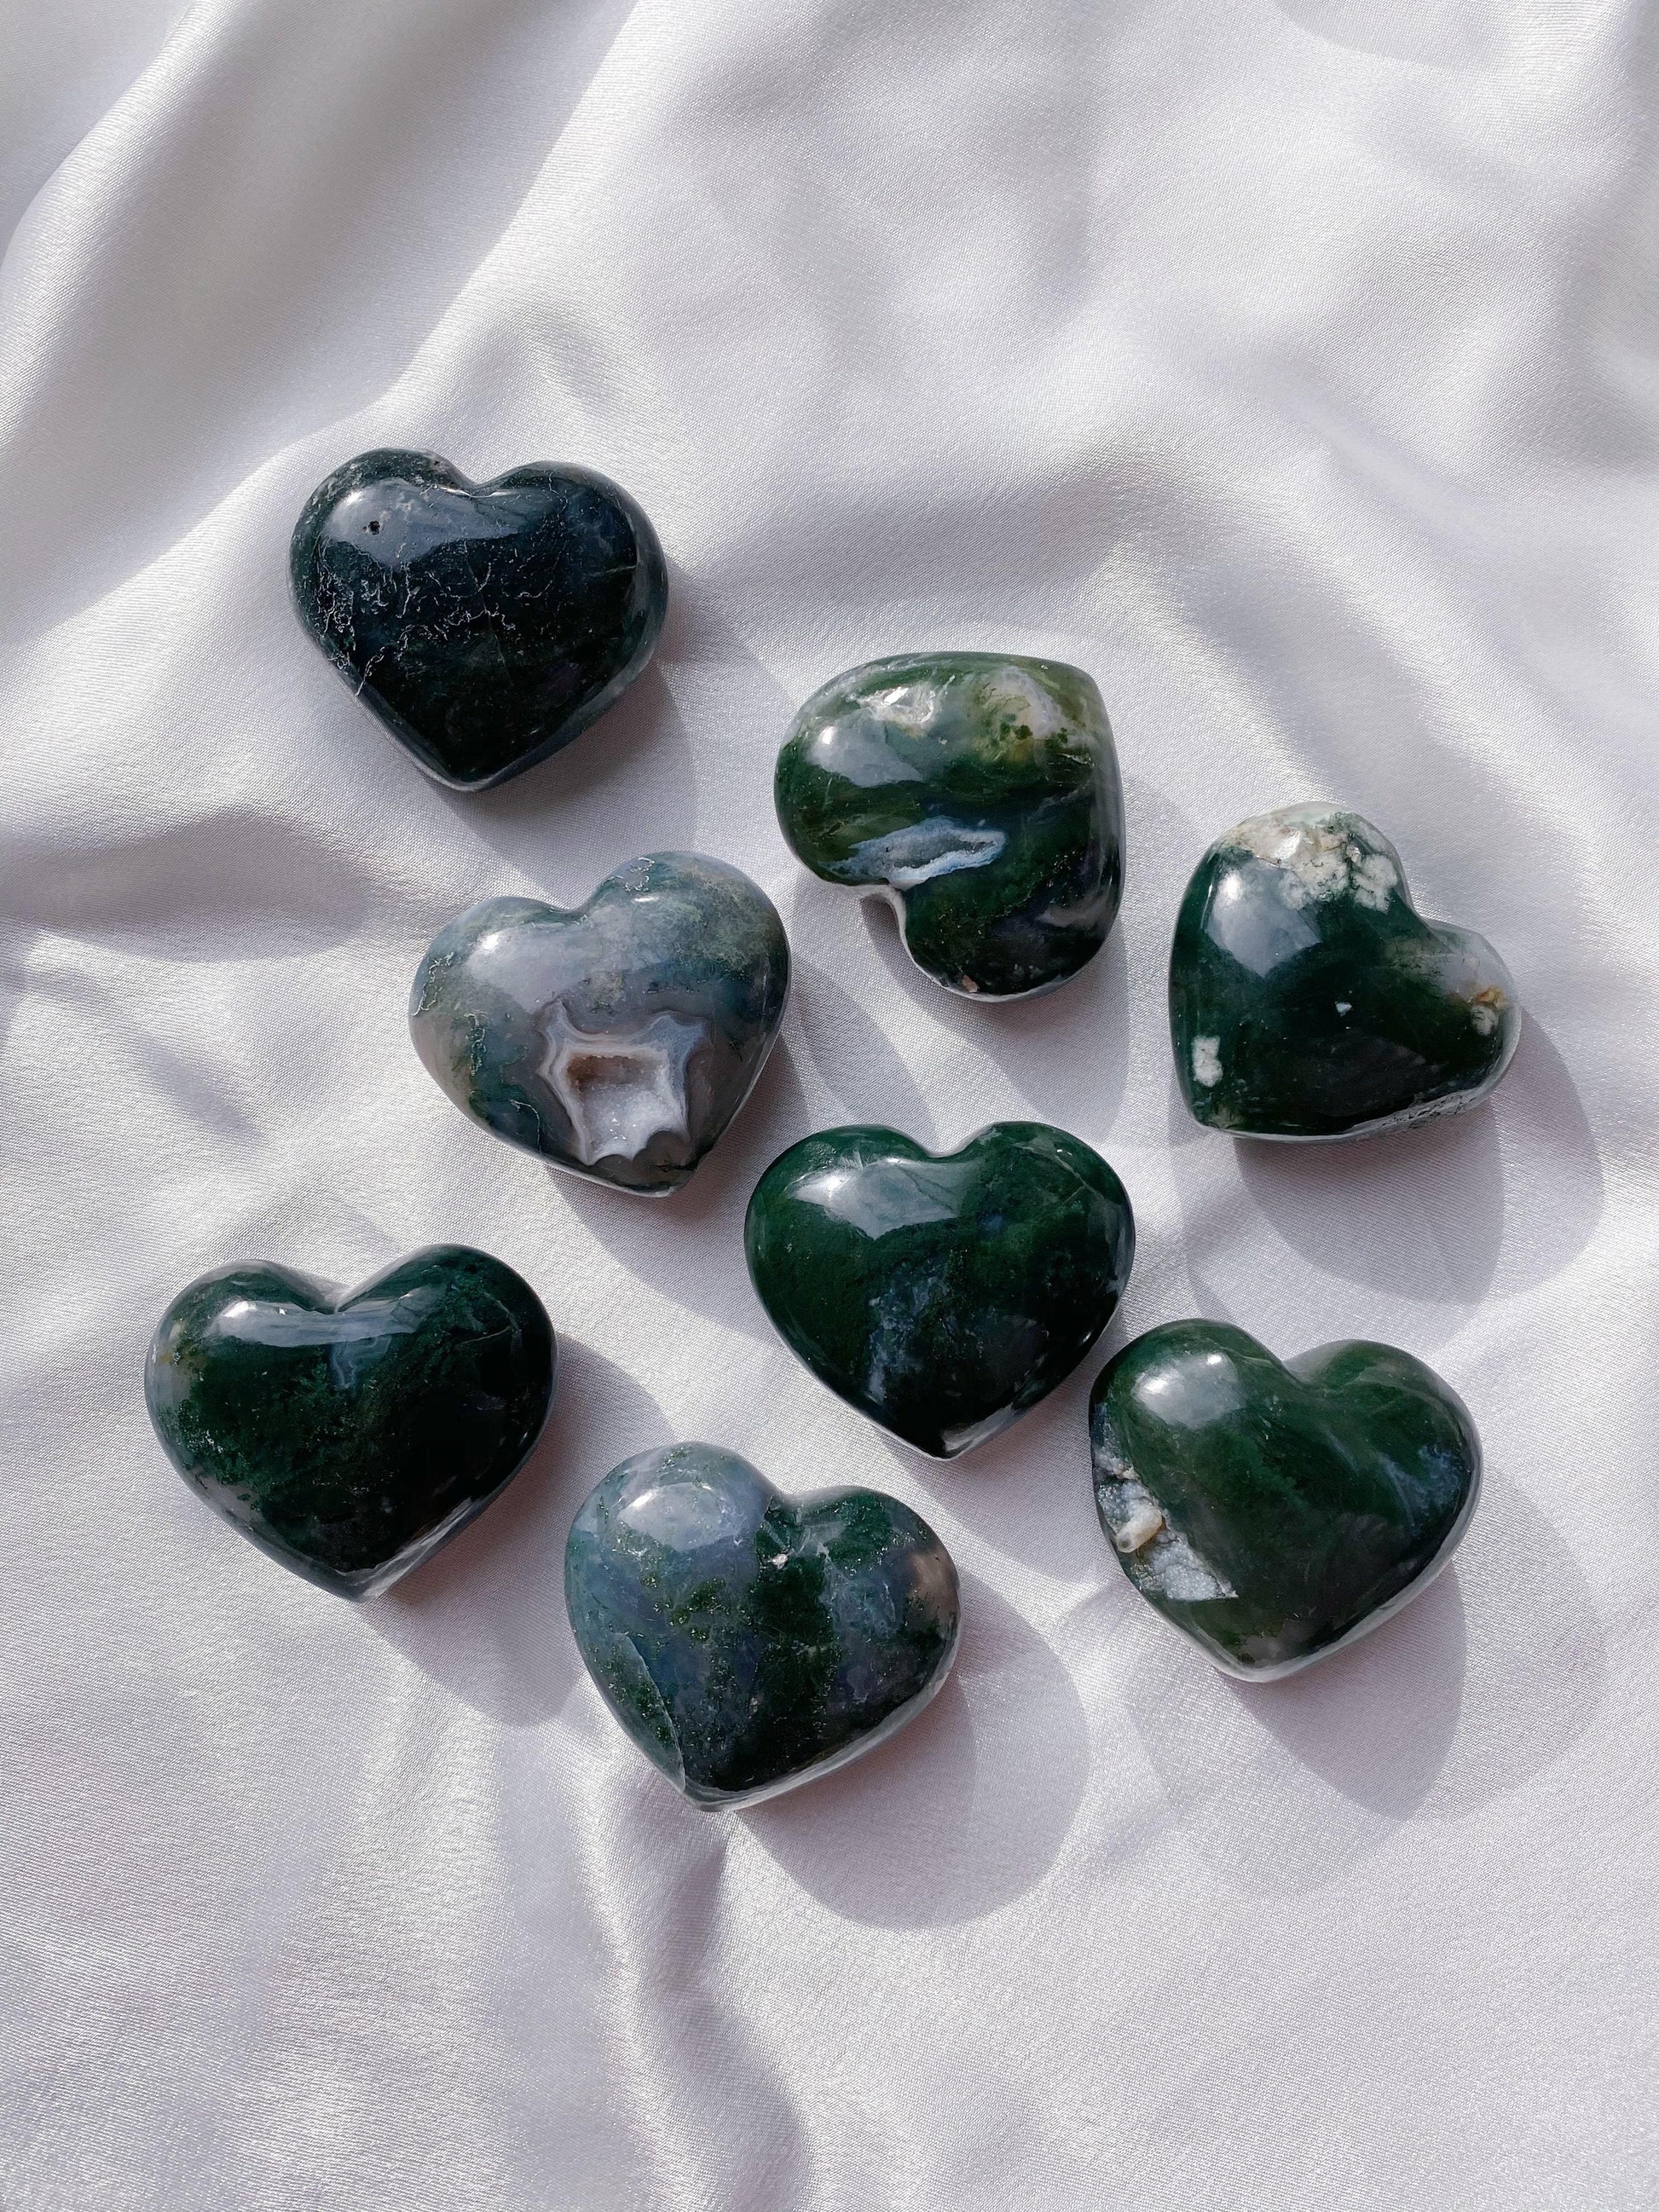 Moss Agate Heart - Caring Crystals